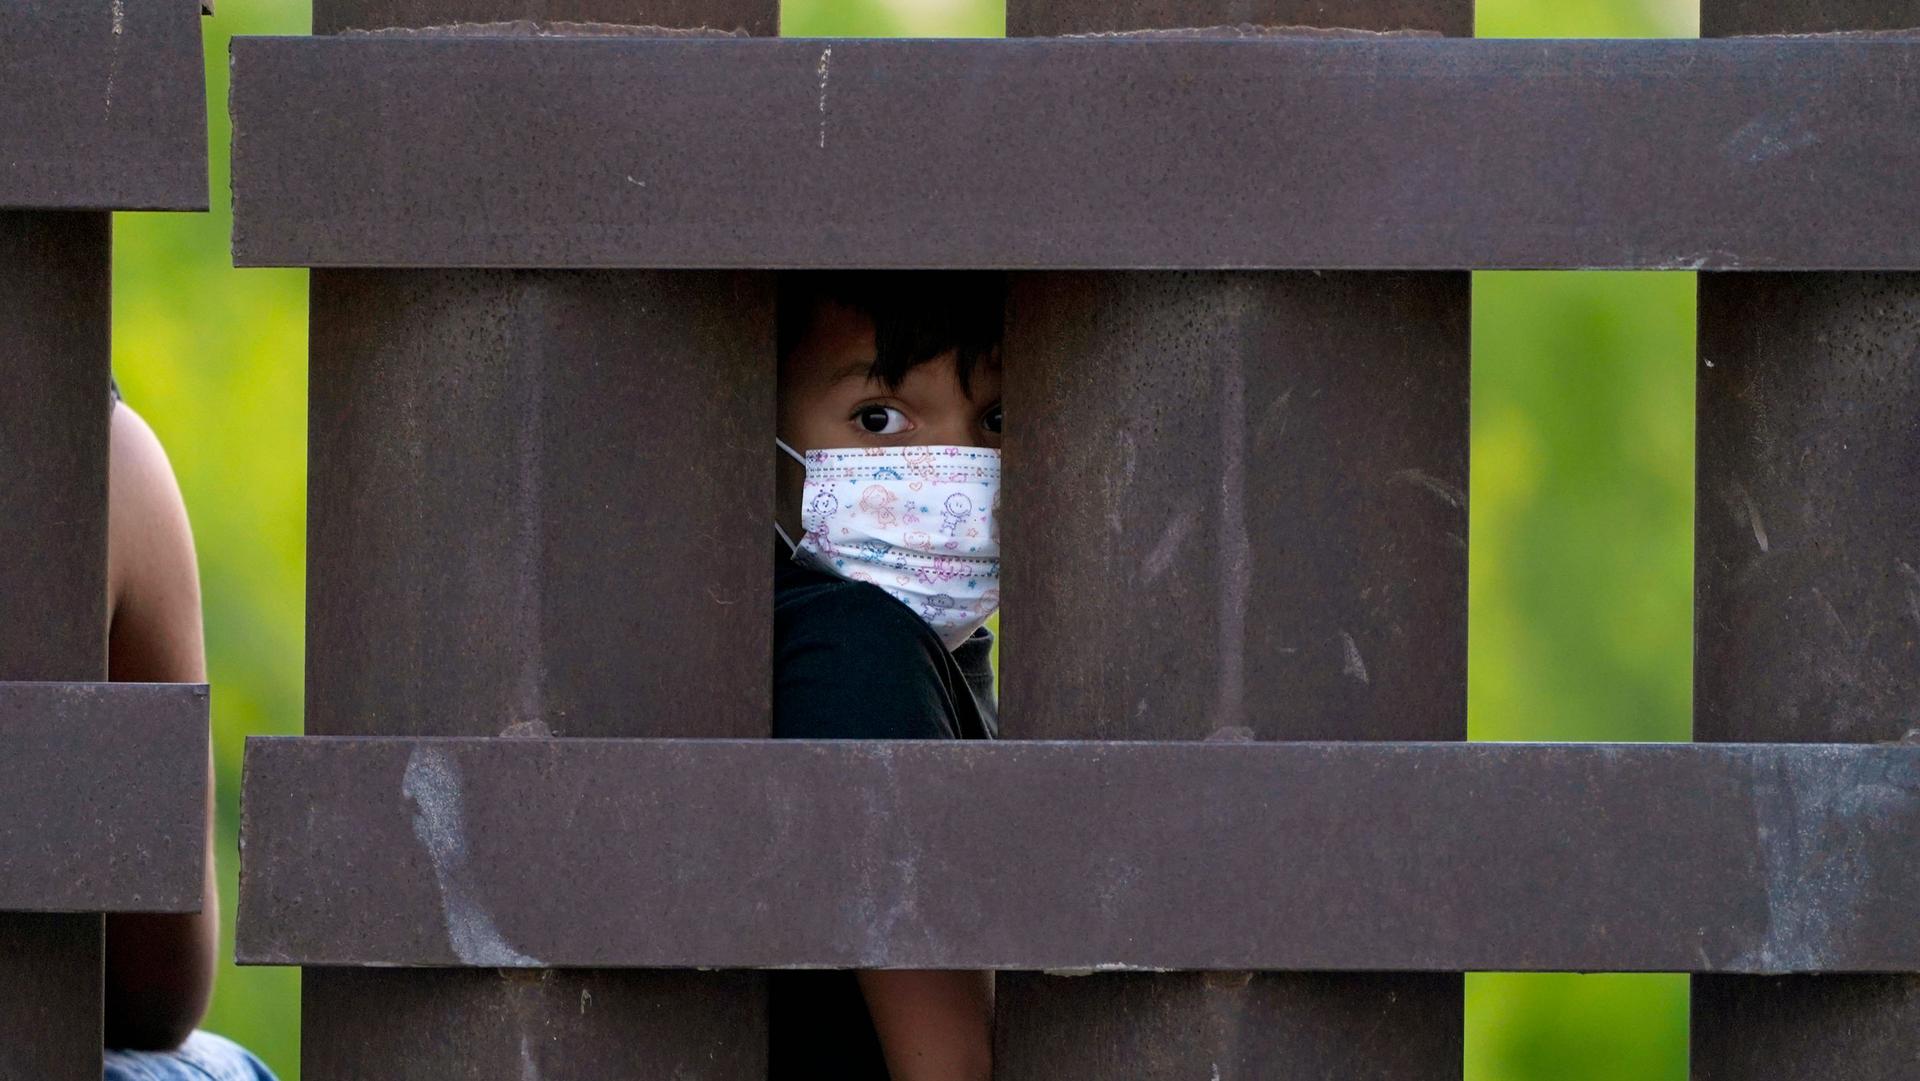 A small child is shown wearing a protective face mask and looking through the large medal polls of the US-Mexico border fence.